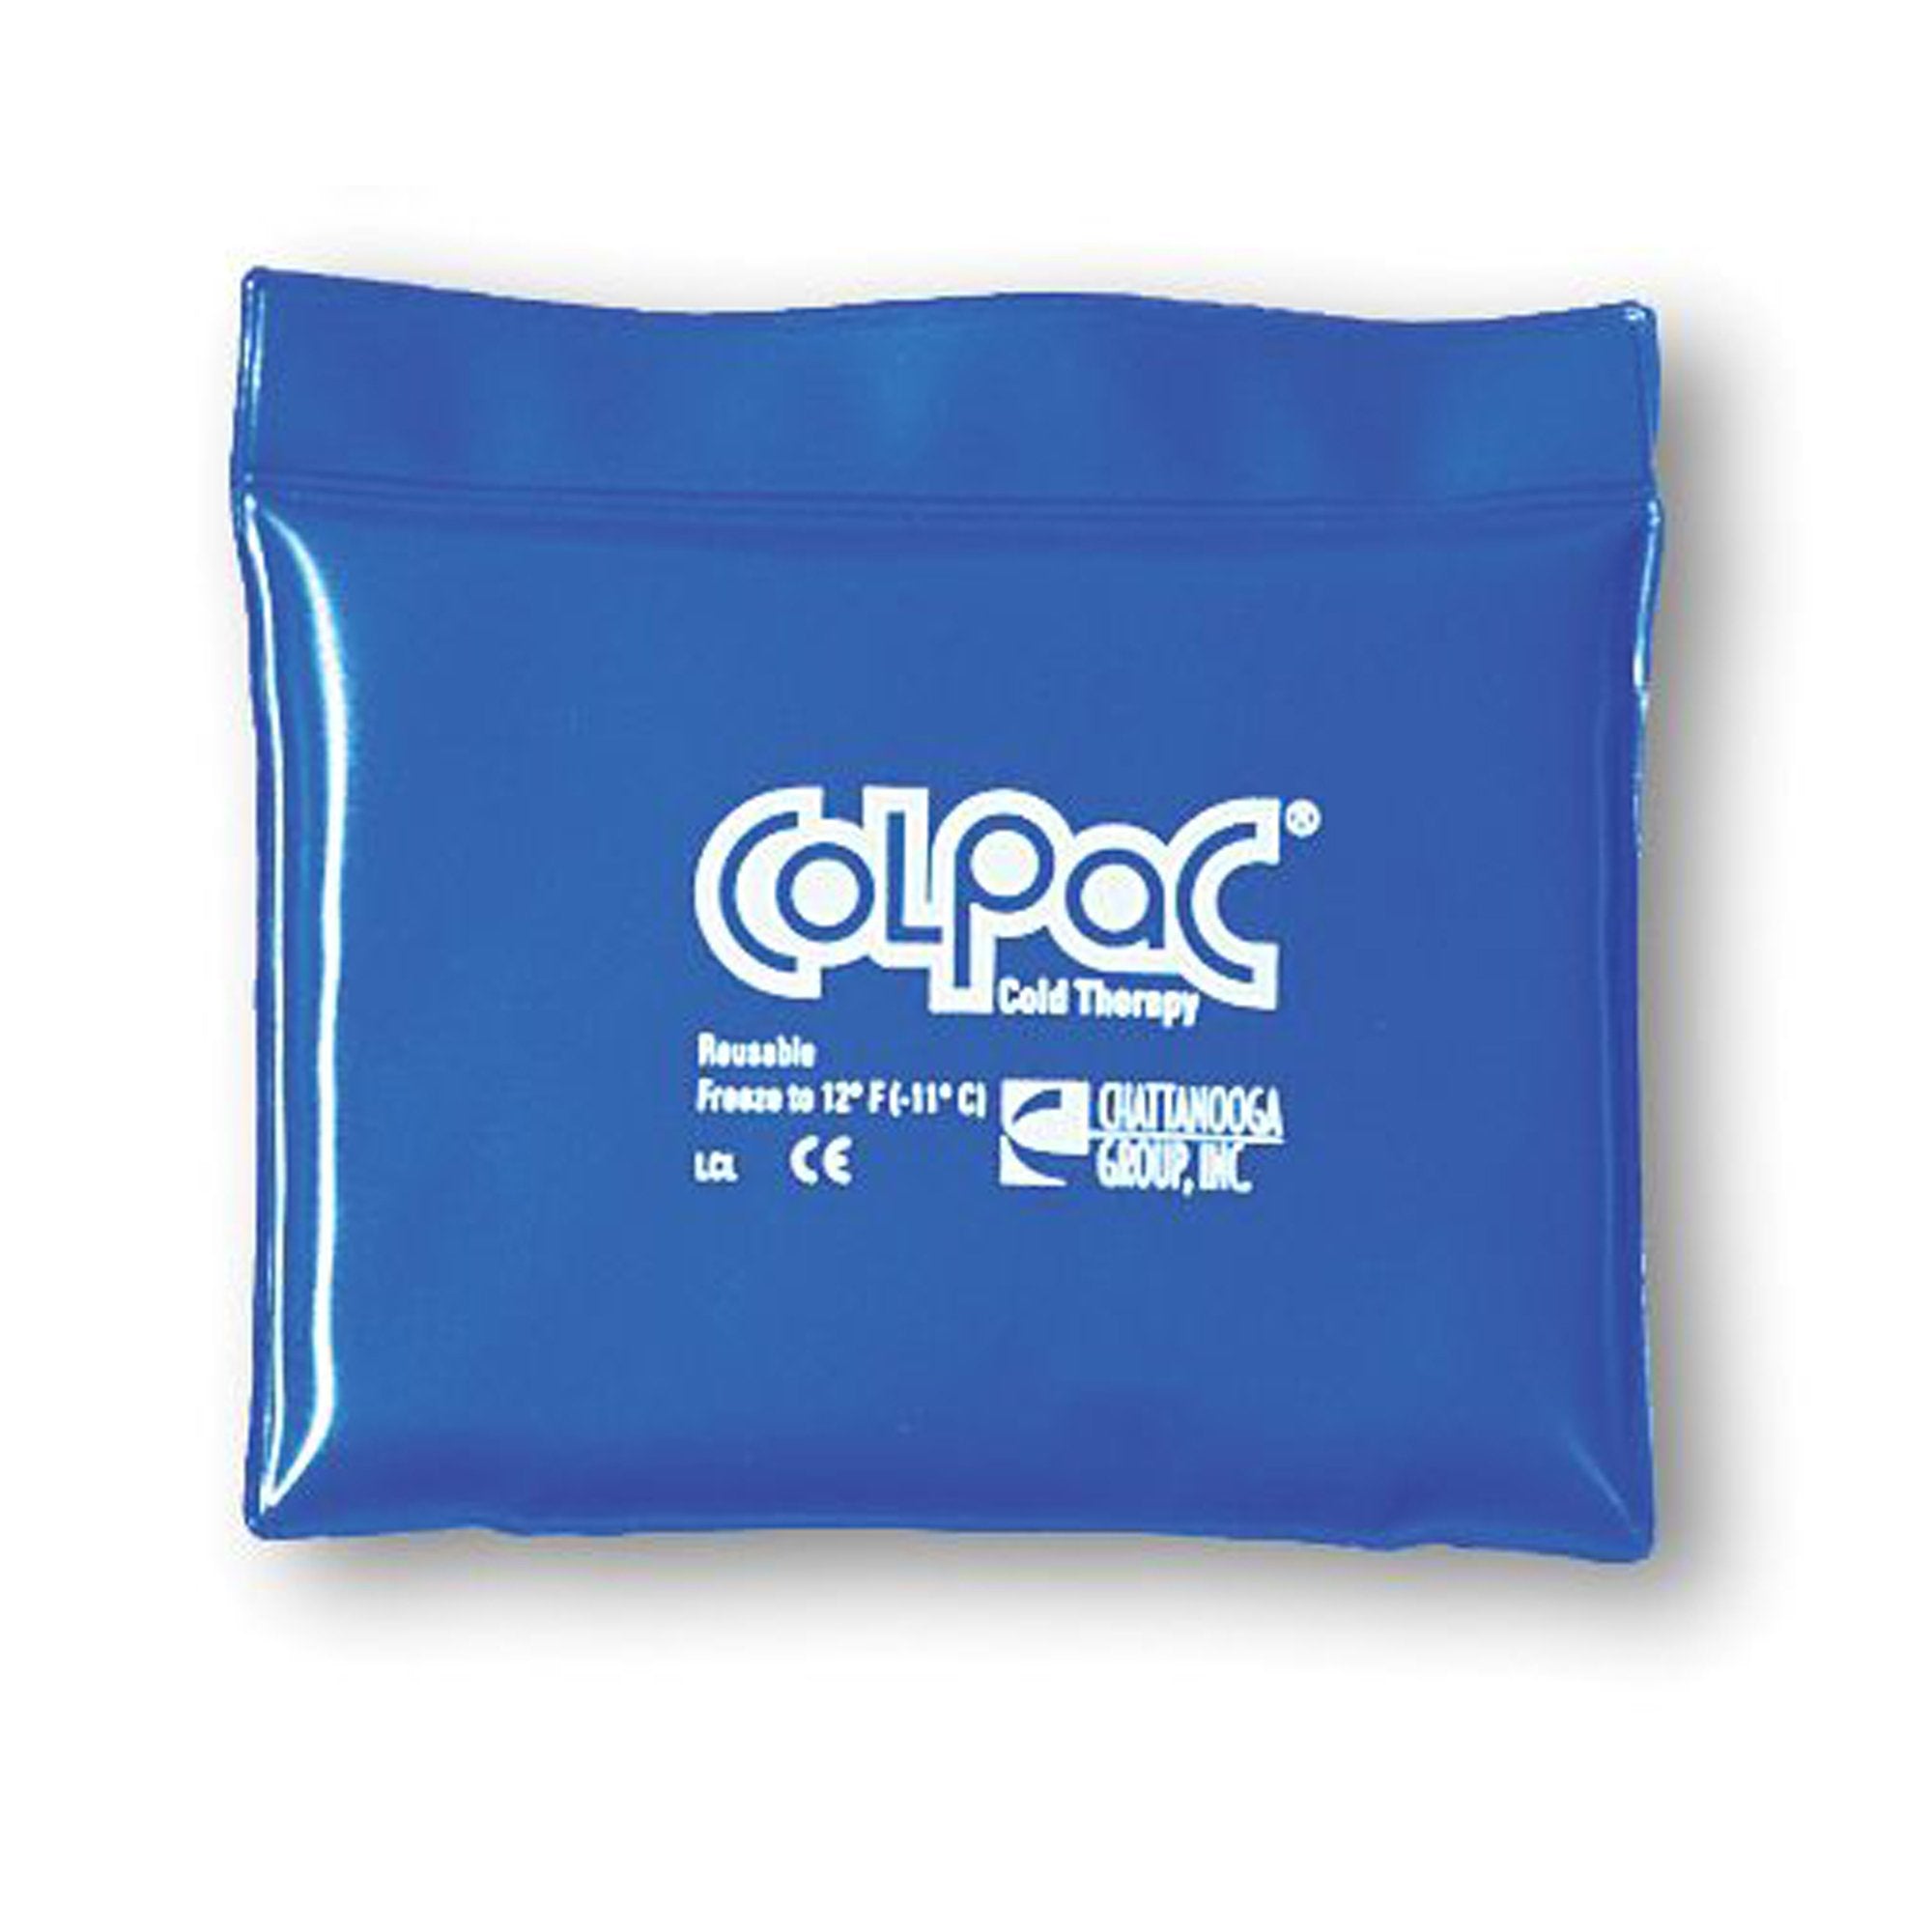 Cold Pack ColPaC® General Purpose Quarter Size 5-1/2 X 7-1/2 Inch Vinyl / Gel Reusable